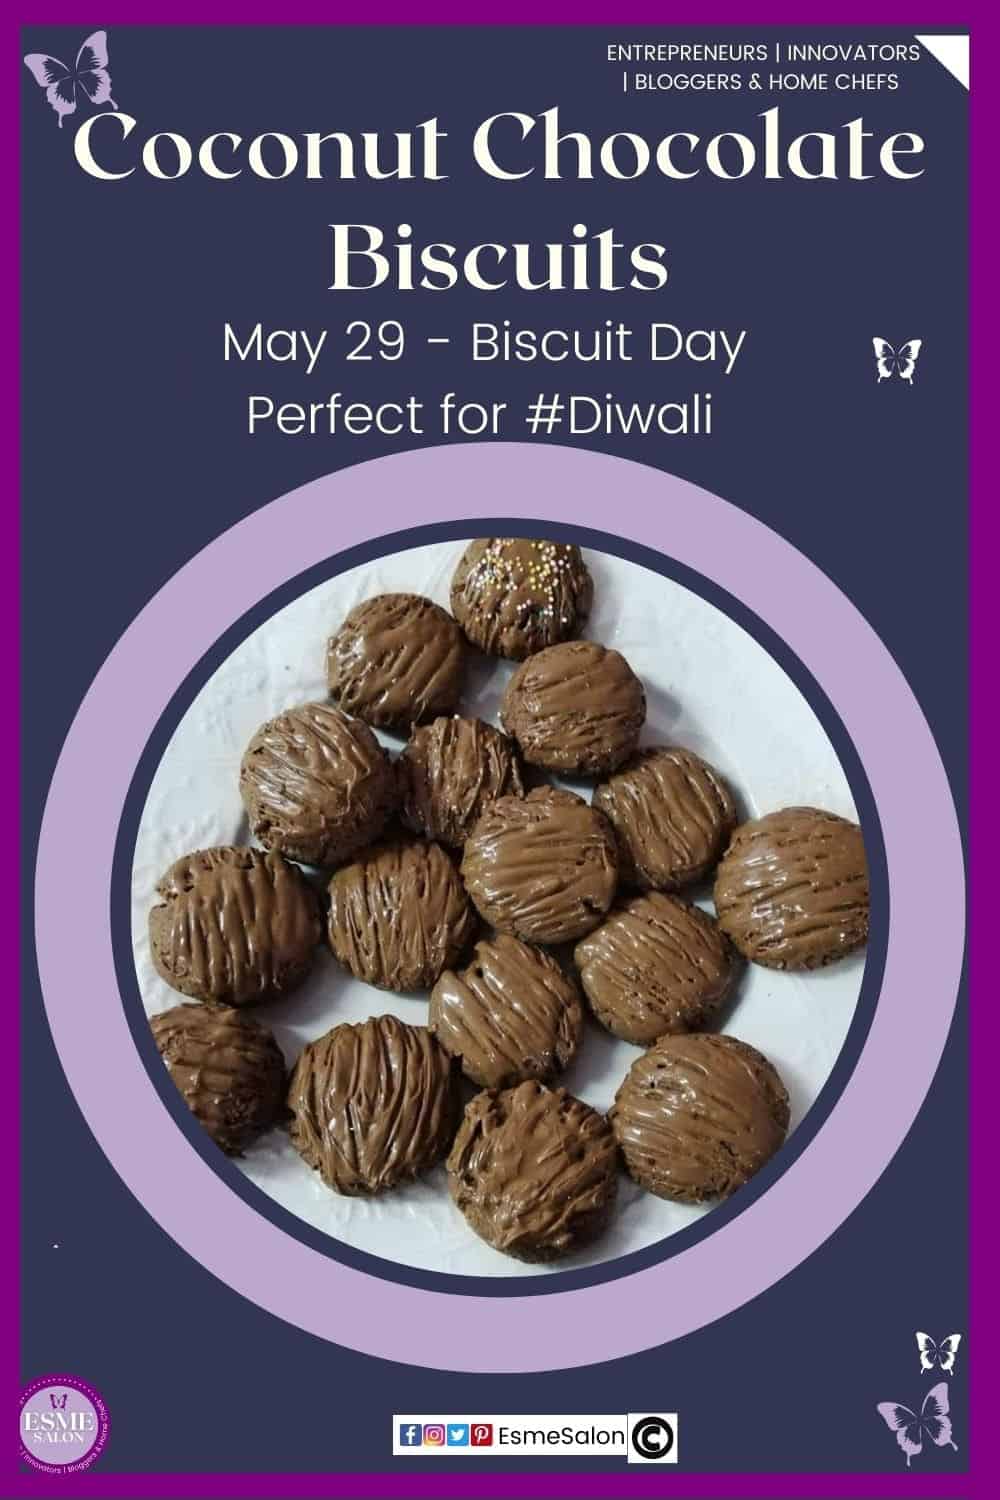 an image of round Coconut Chocolate Biscuits on a while plate